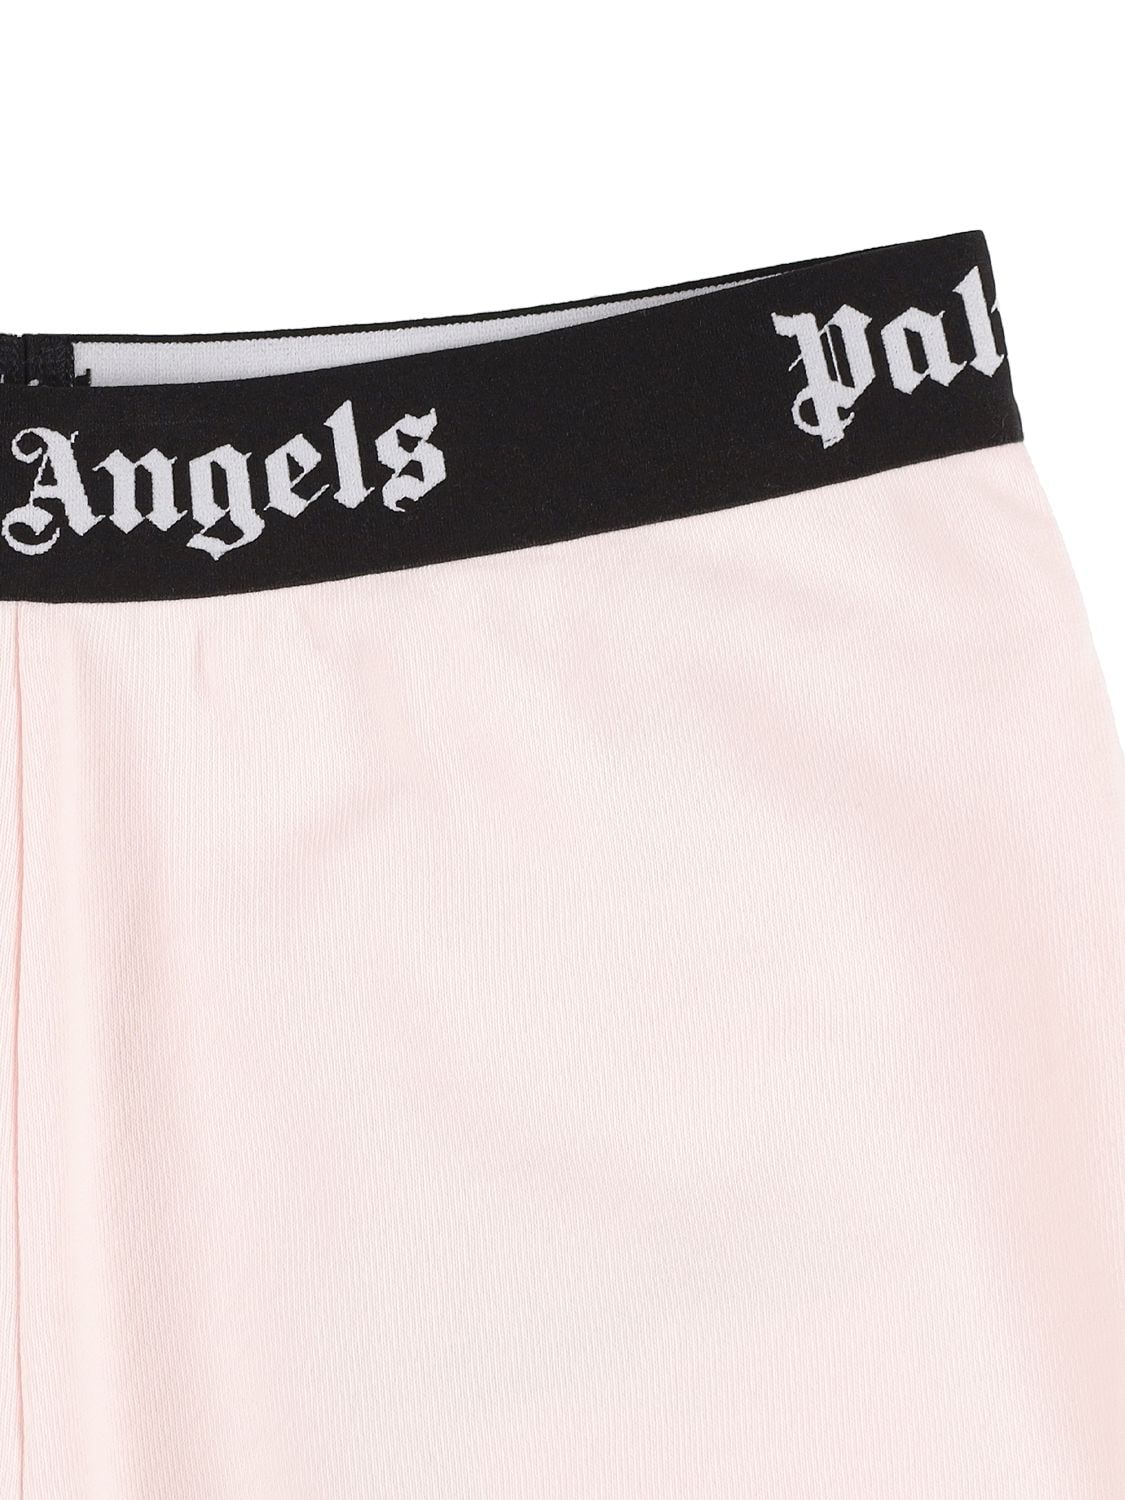 Shop Palm Angels Logo Cotton Sweat Shorts In Light Pink